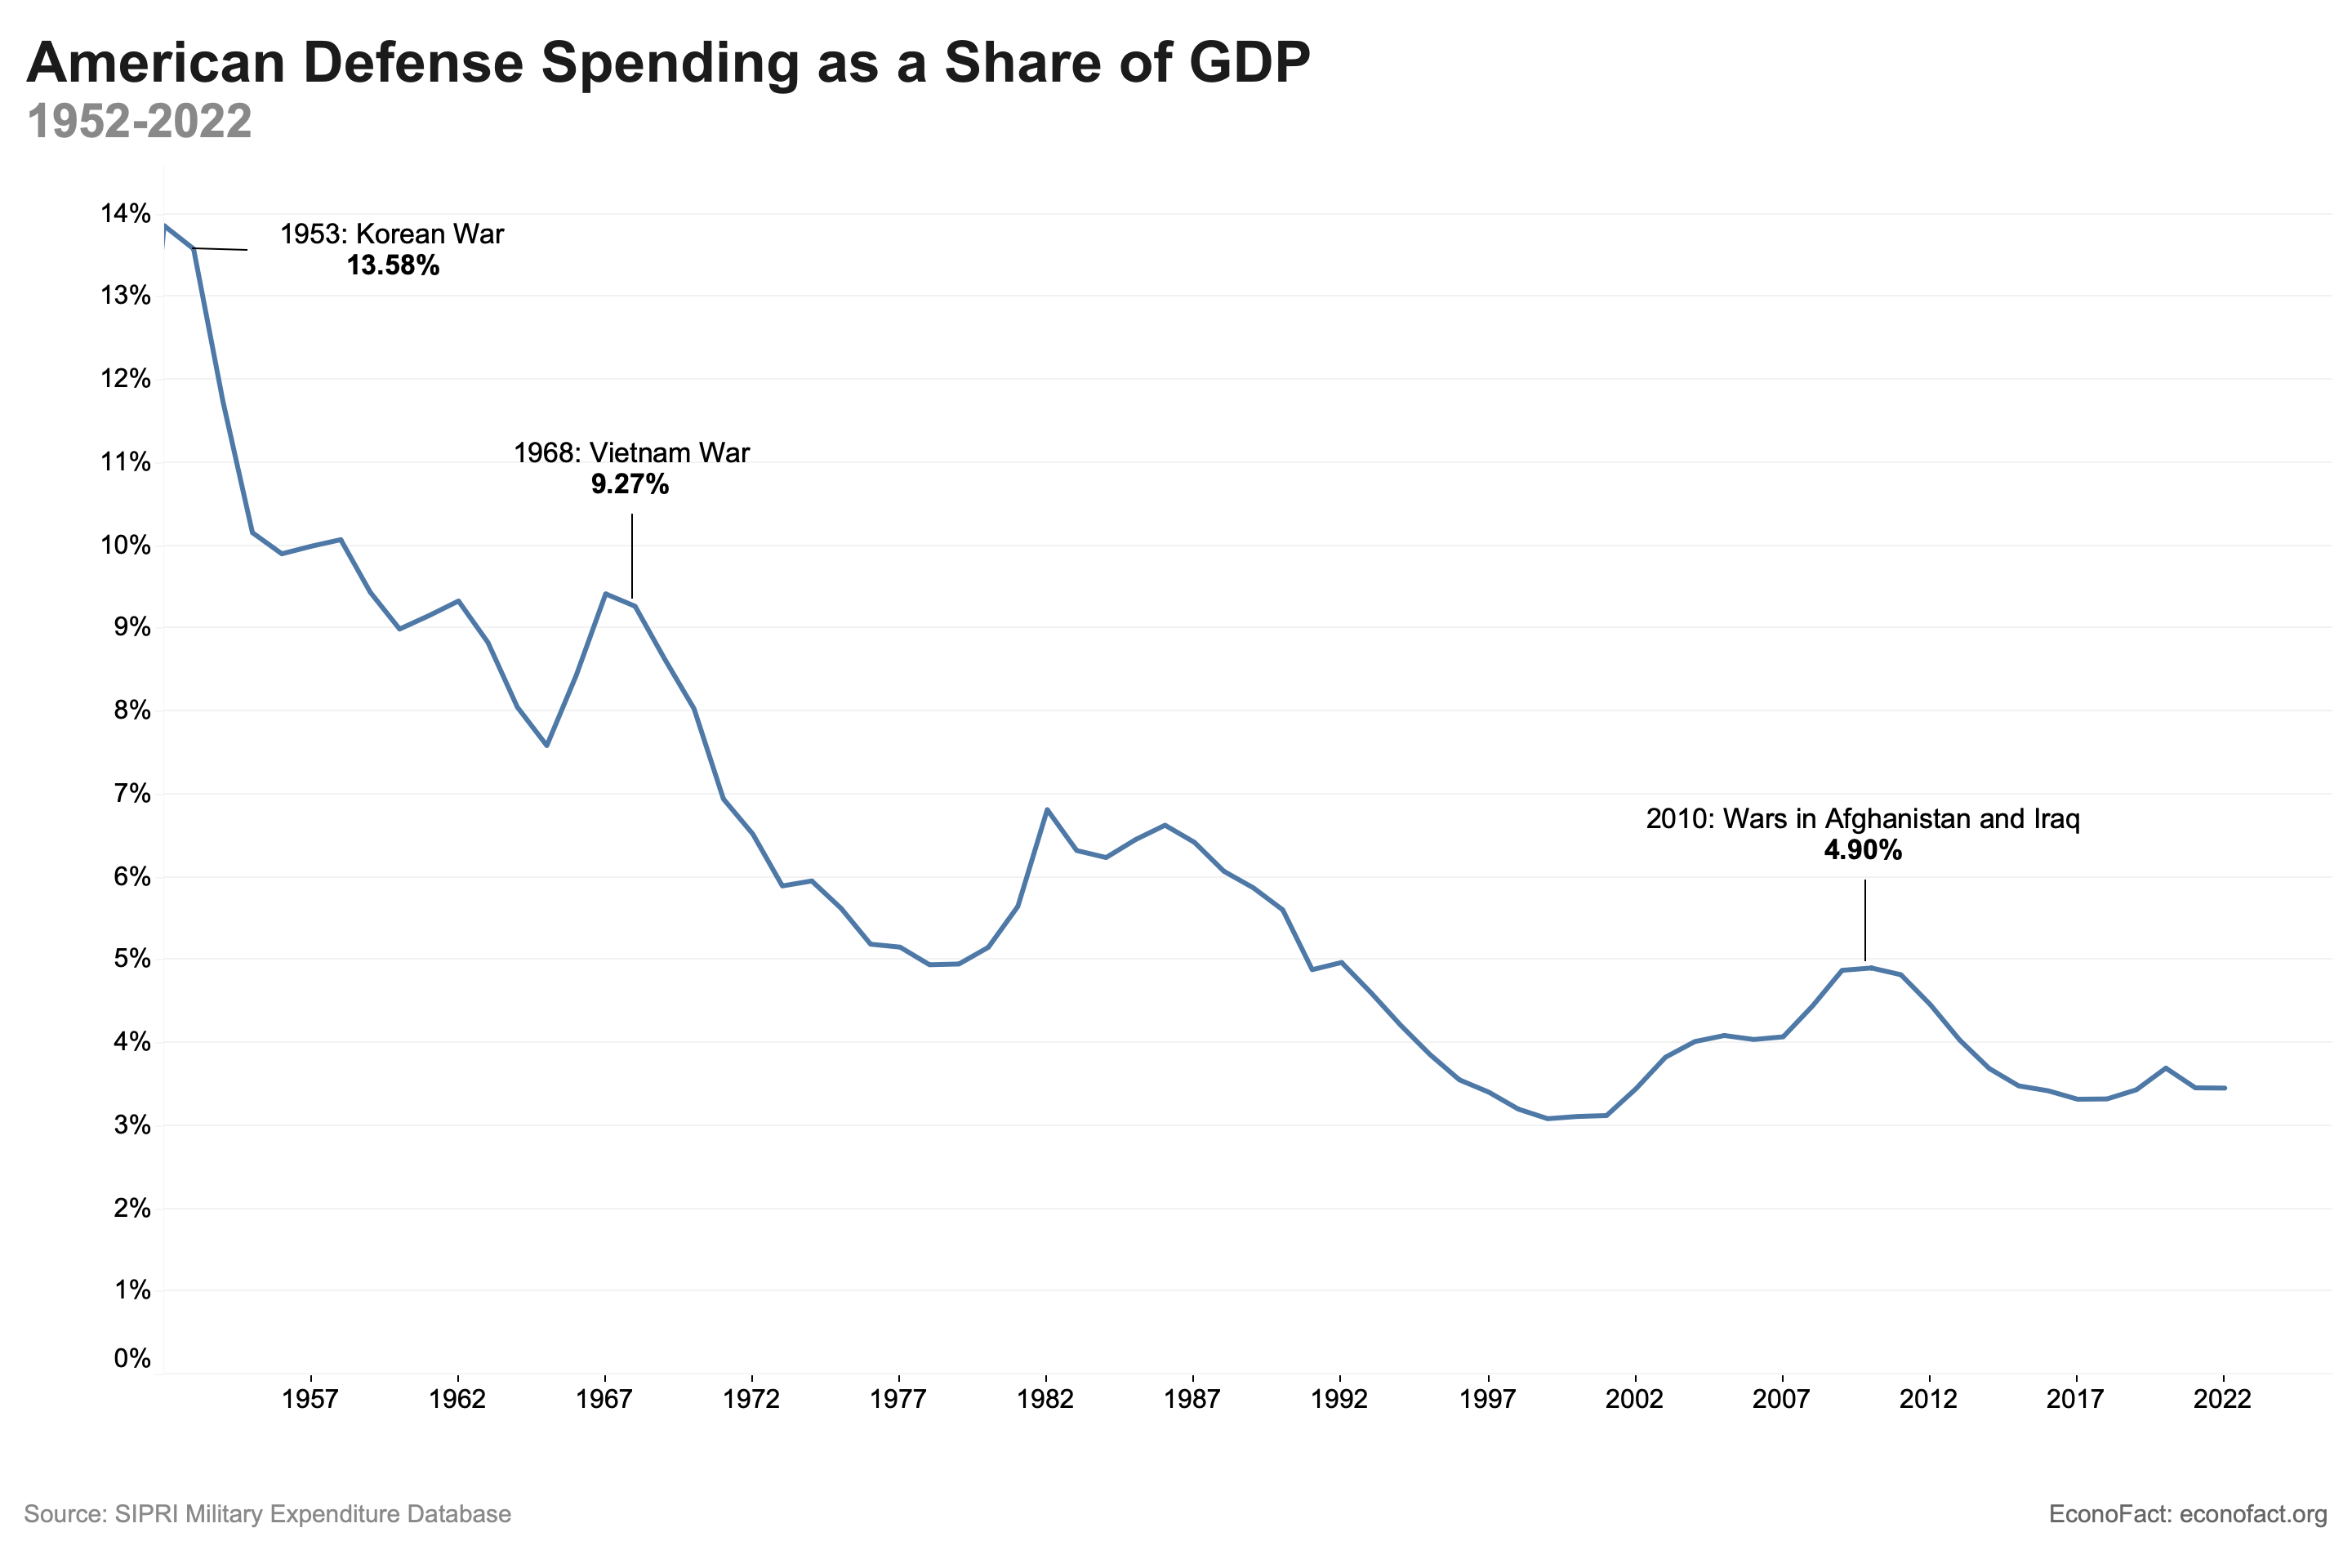 Line graph of U.S. defense spending as a share of GDP, 1952-2022